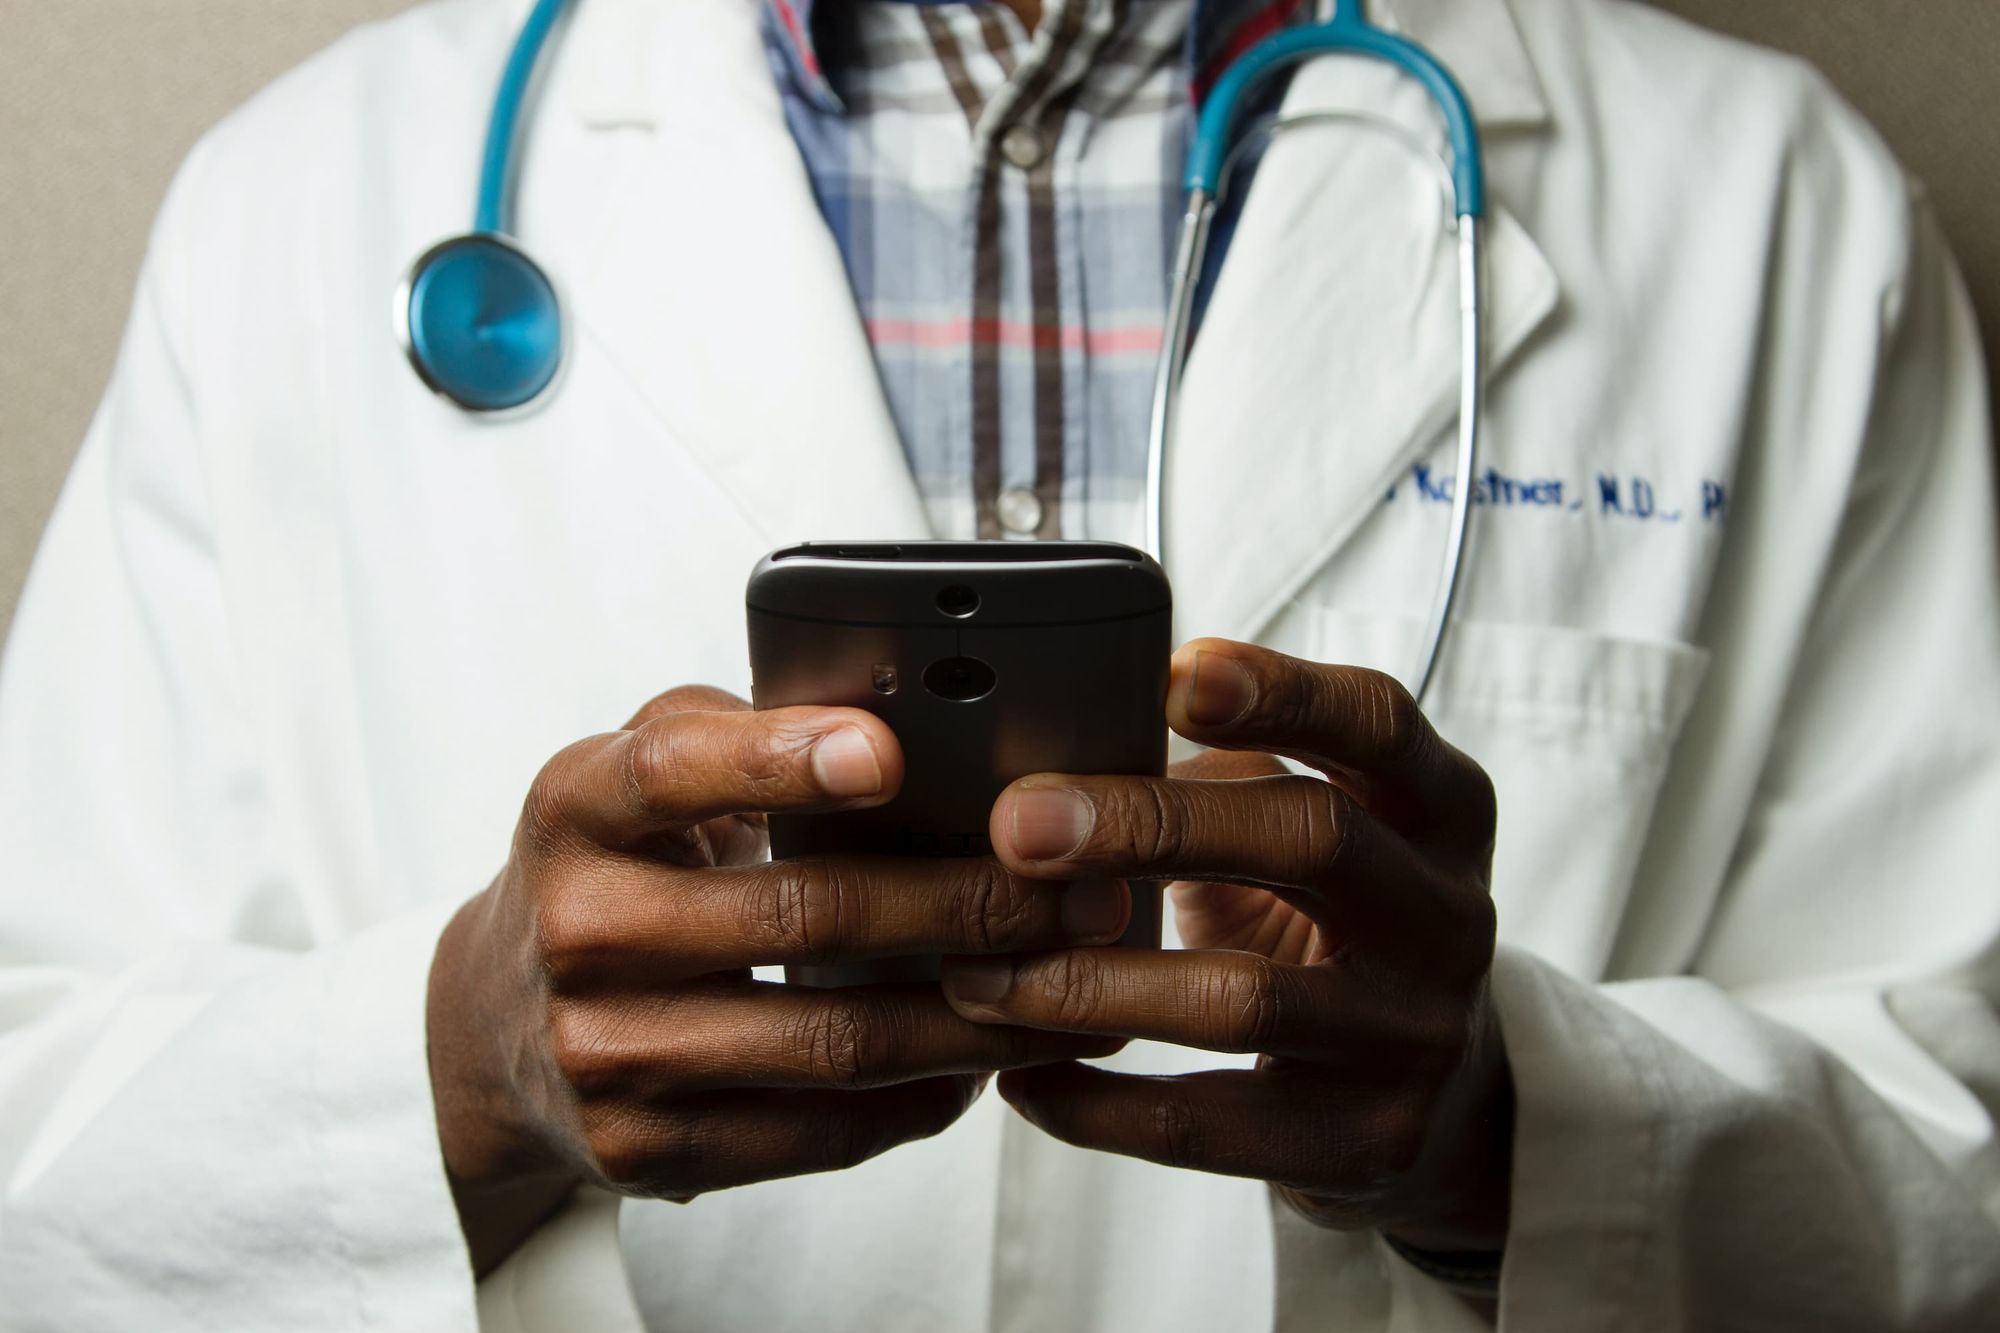 A doctor using a mobile phone